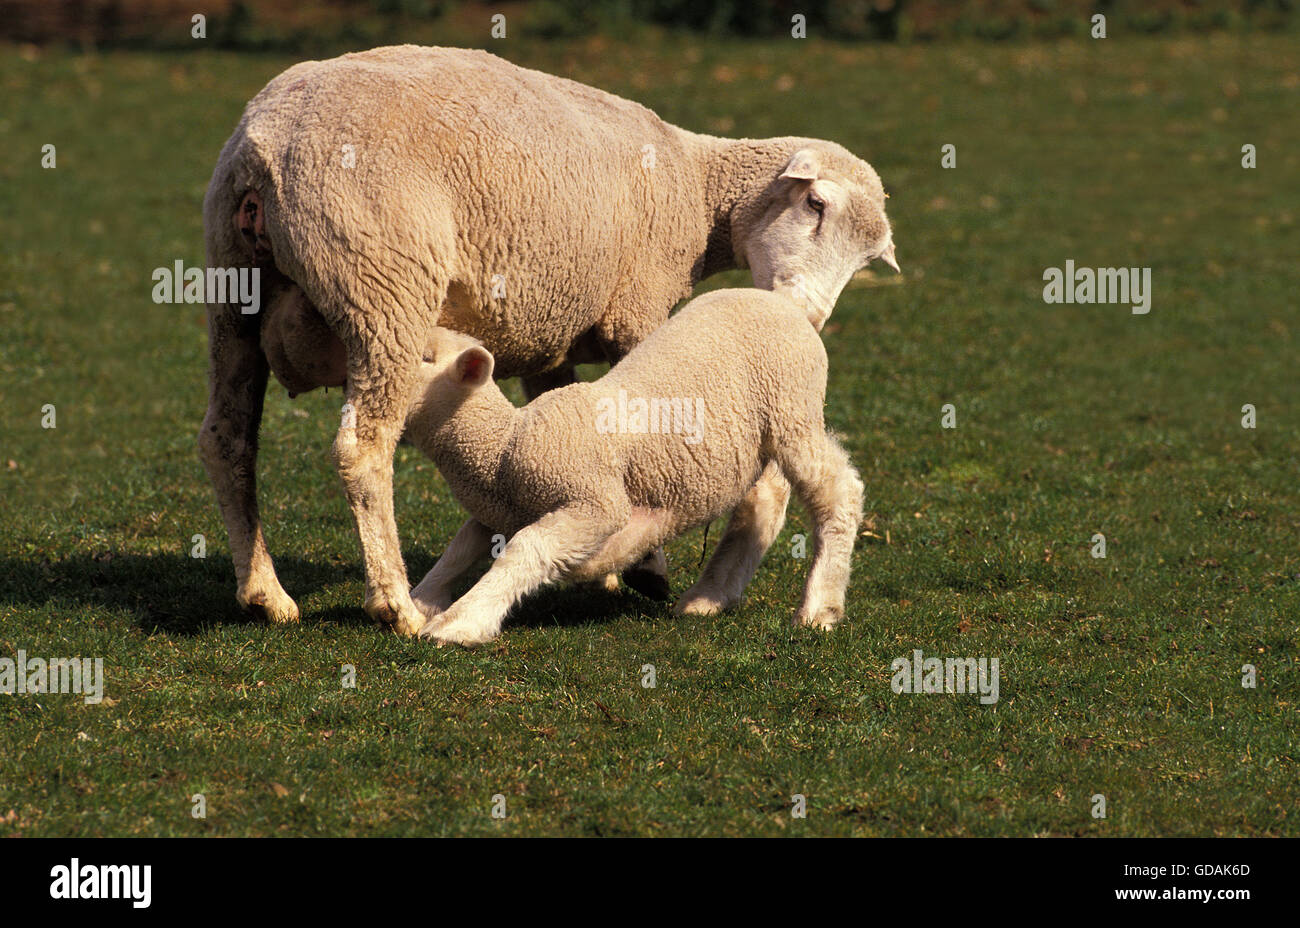 ILE DE FRANCE SHEEP, A FRENCH BREED, MOTHER WITH LAMB SUCKLING Stock Photo